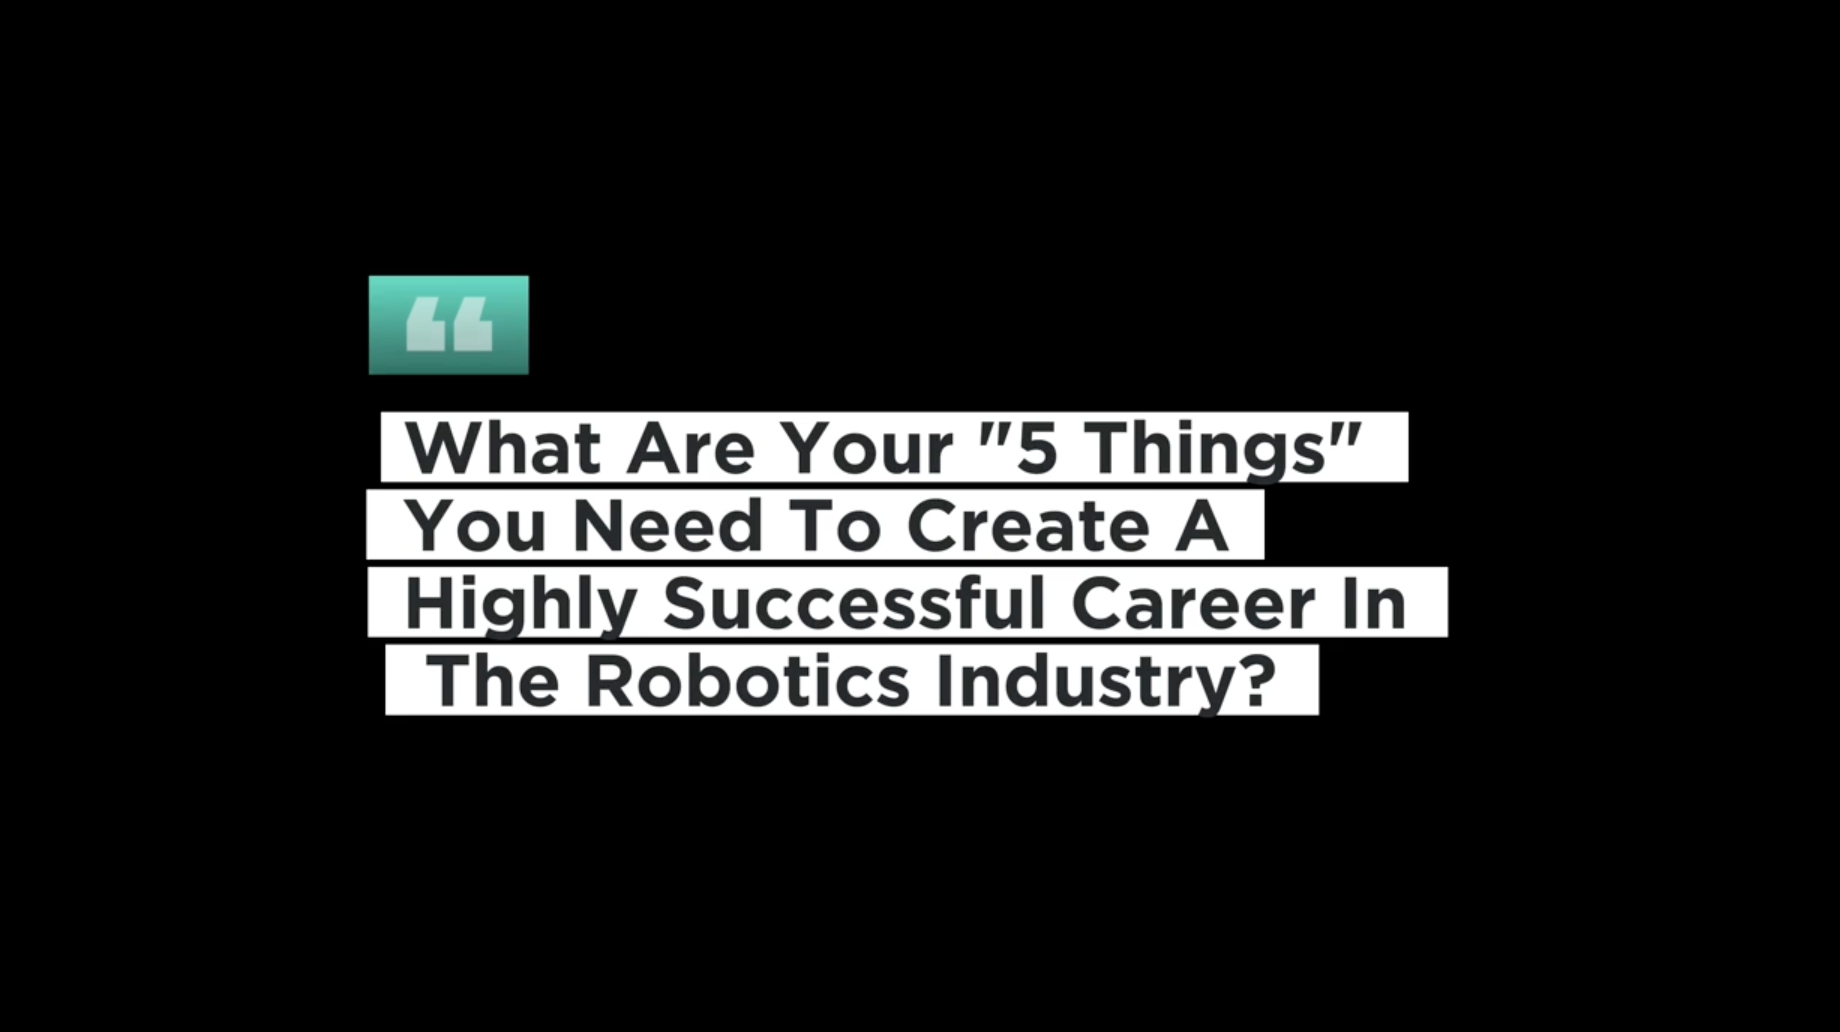 VIDEO: 5 Things You Need to Succeed in the Surgical Robotics Industry